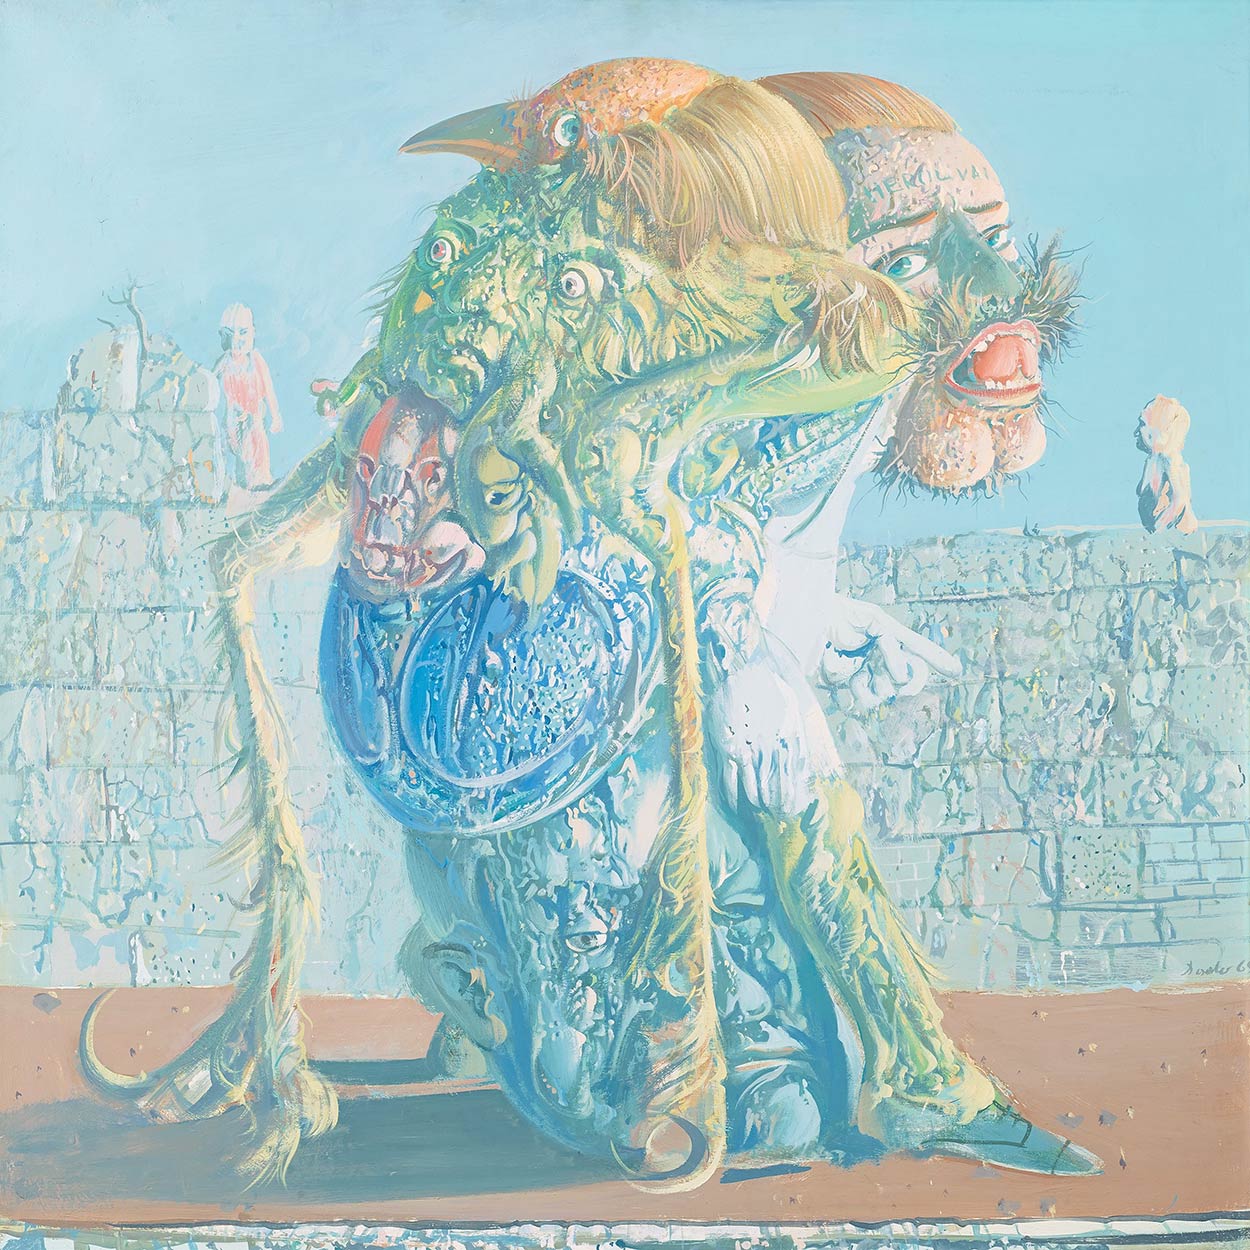 Dado’s painting: Untitled, 1969